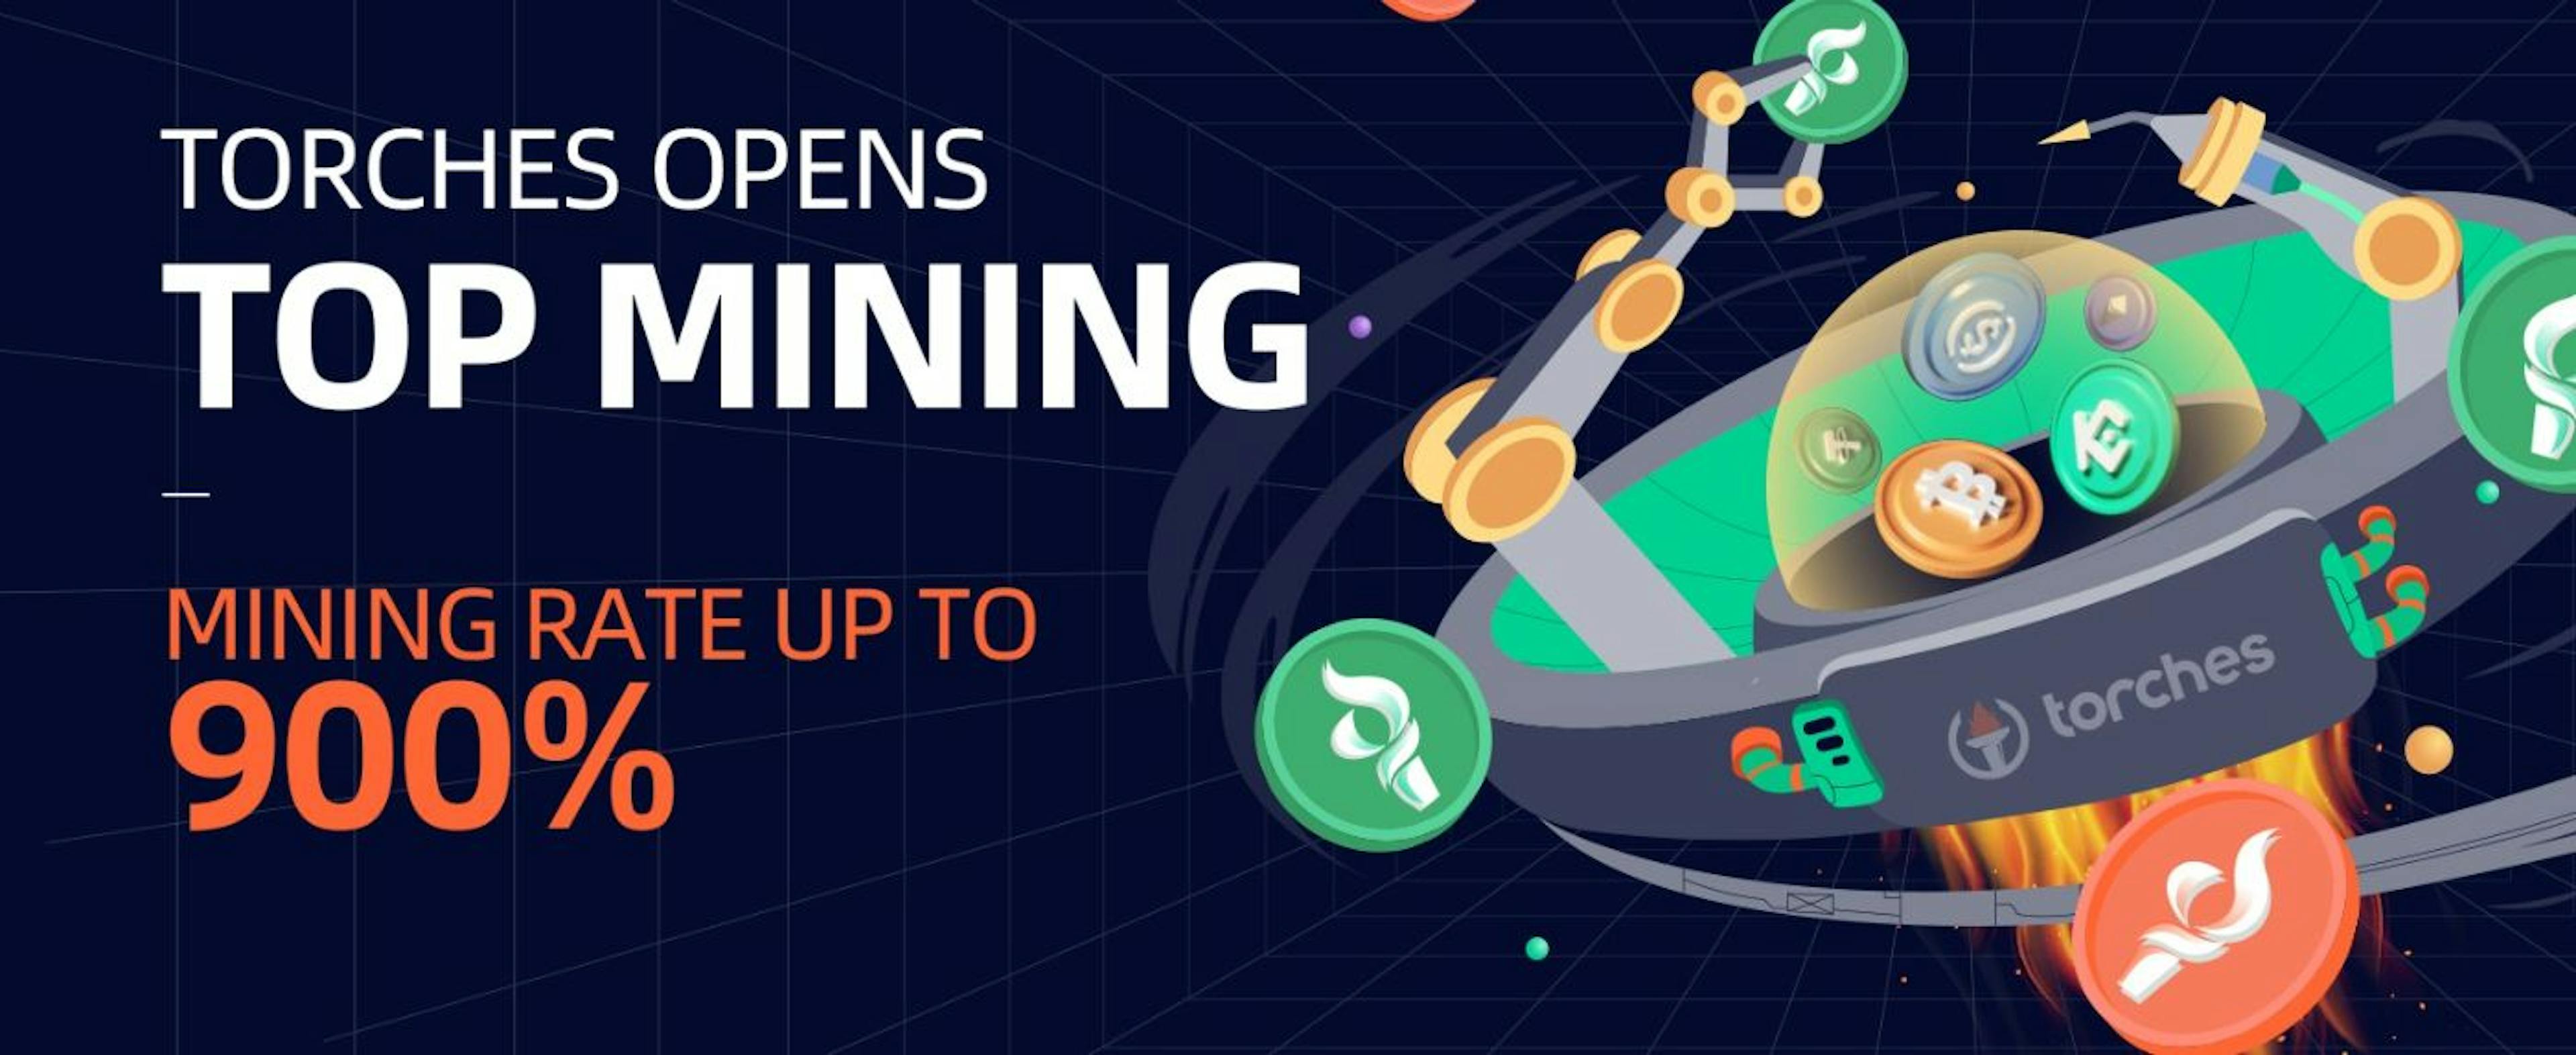 featured image - TOP Mining with Up to 900% Mining Rate!